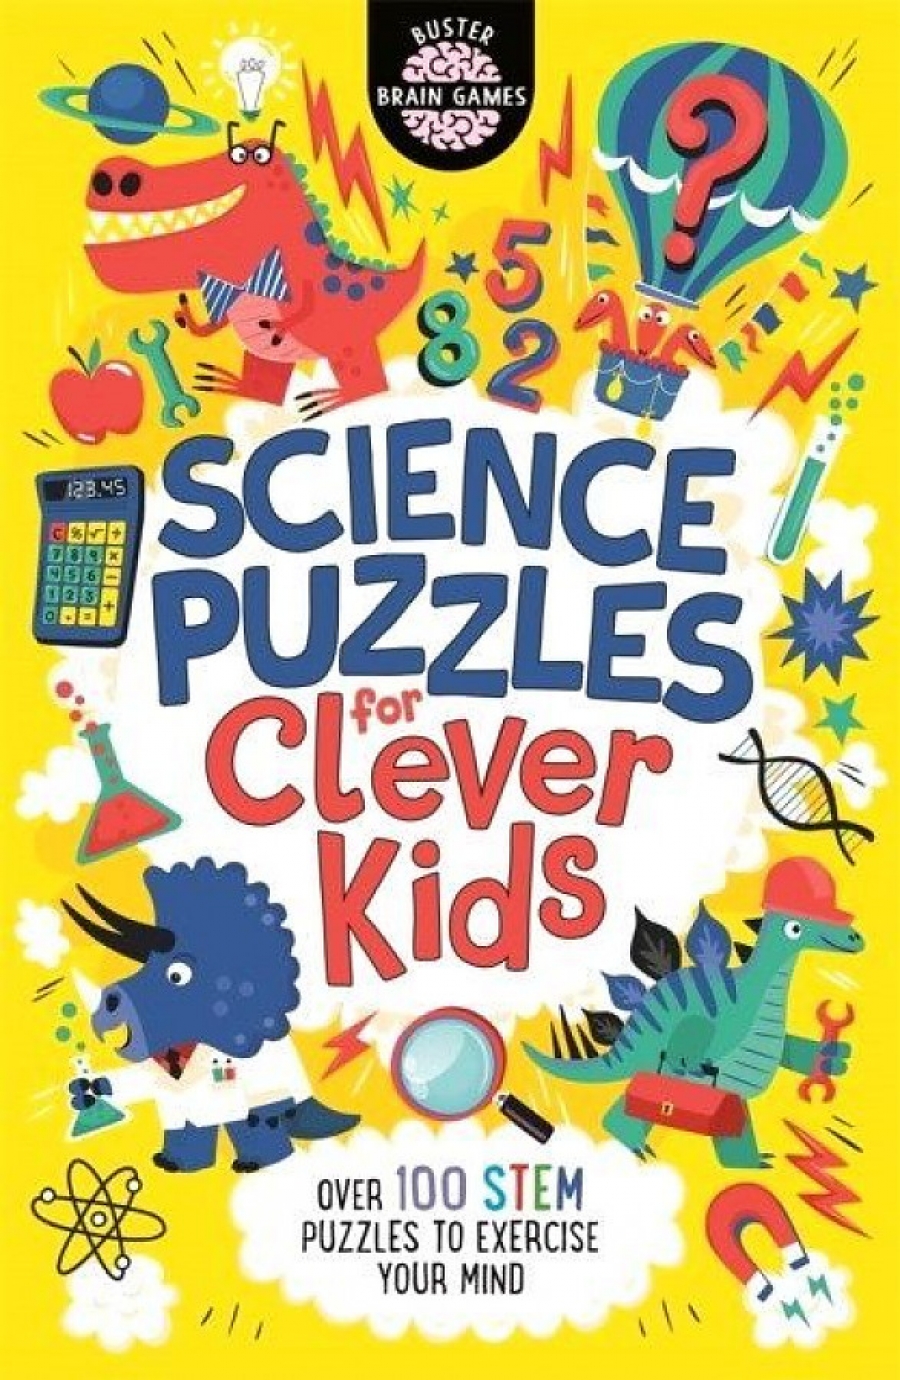 Science Puzzles for Clever Kids: Over 100 STEM Puzzles 